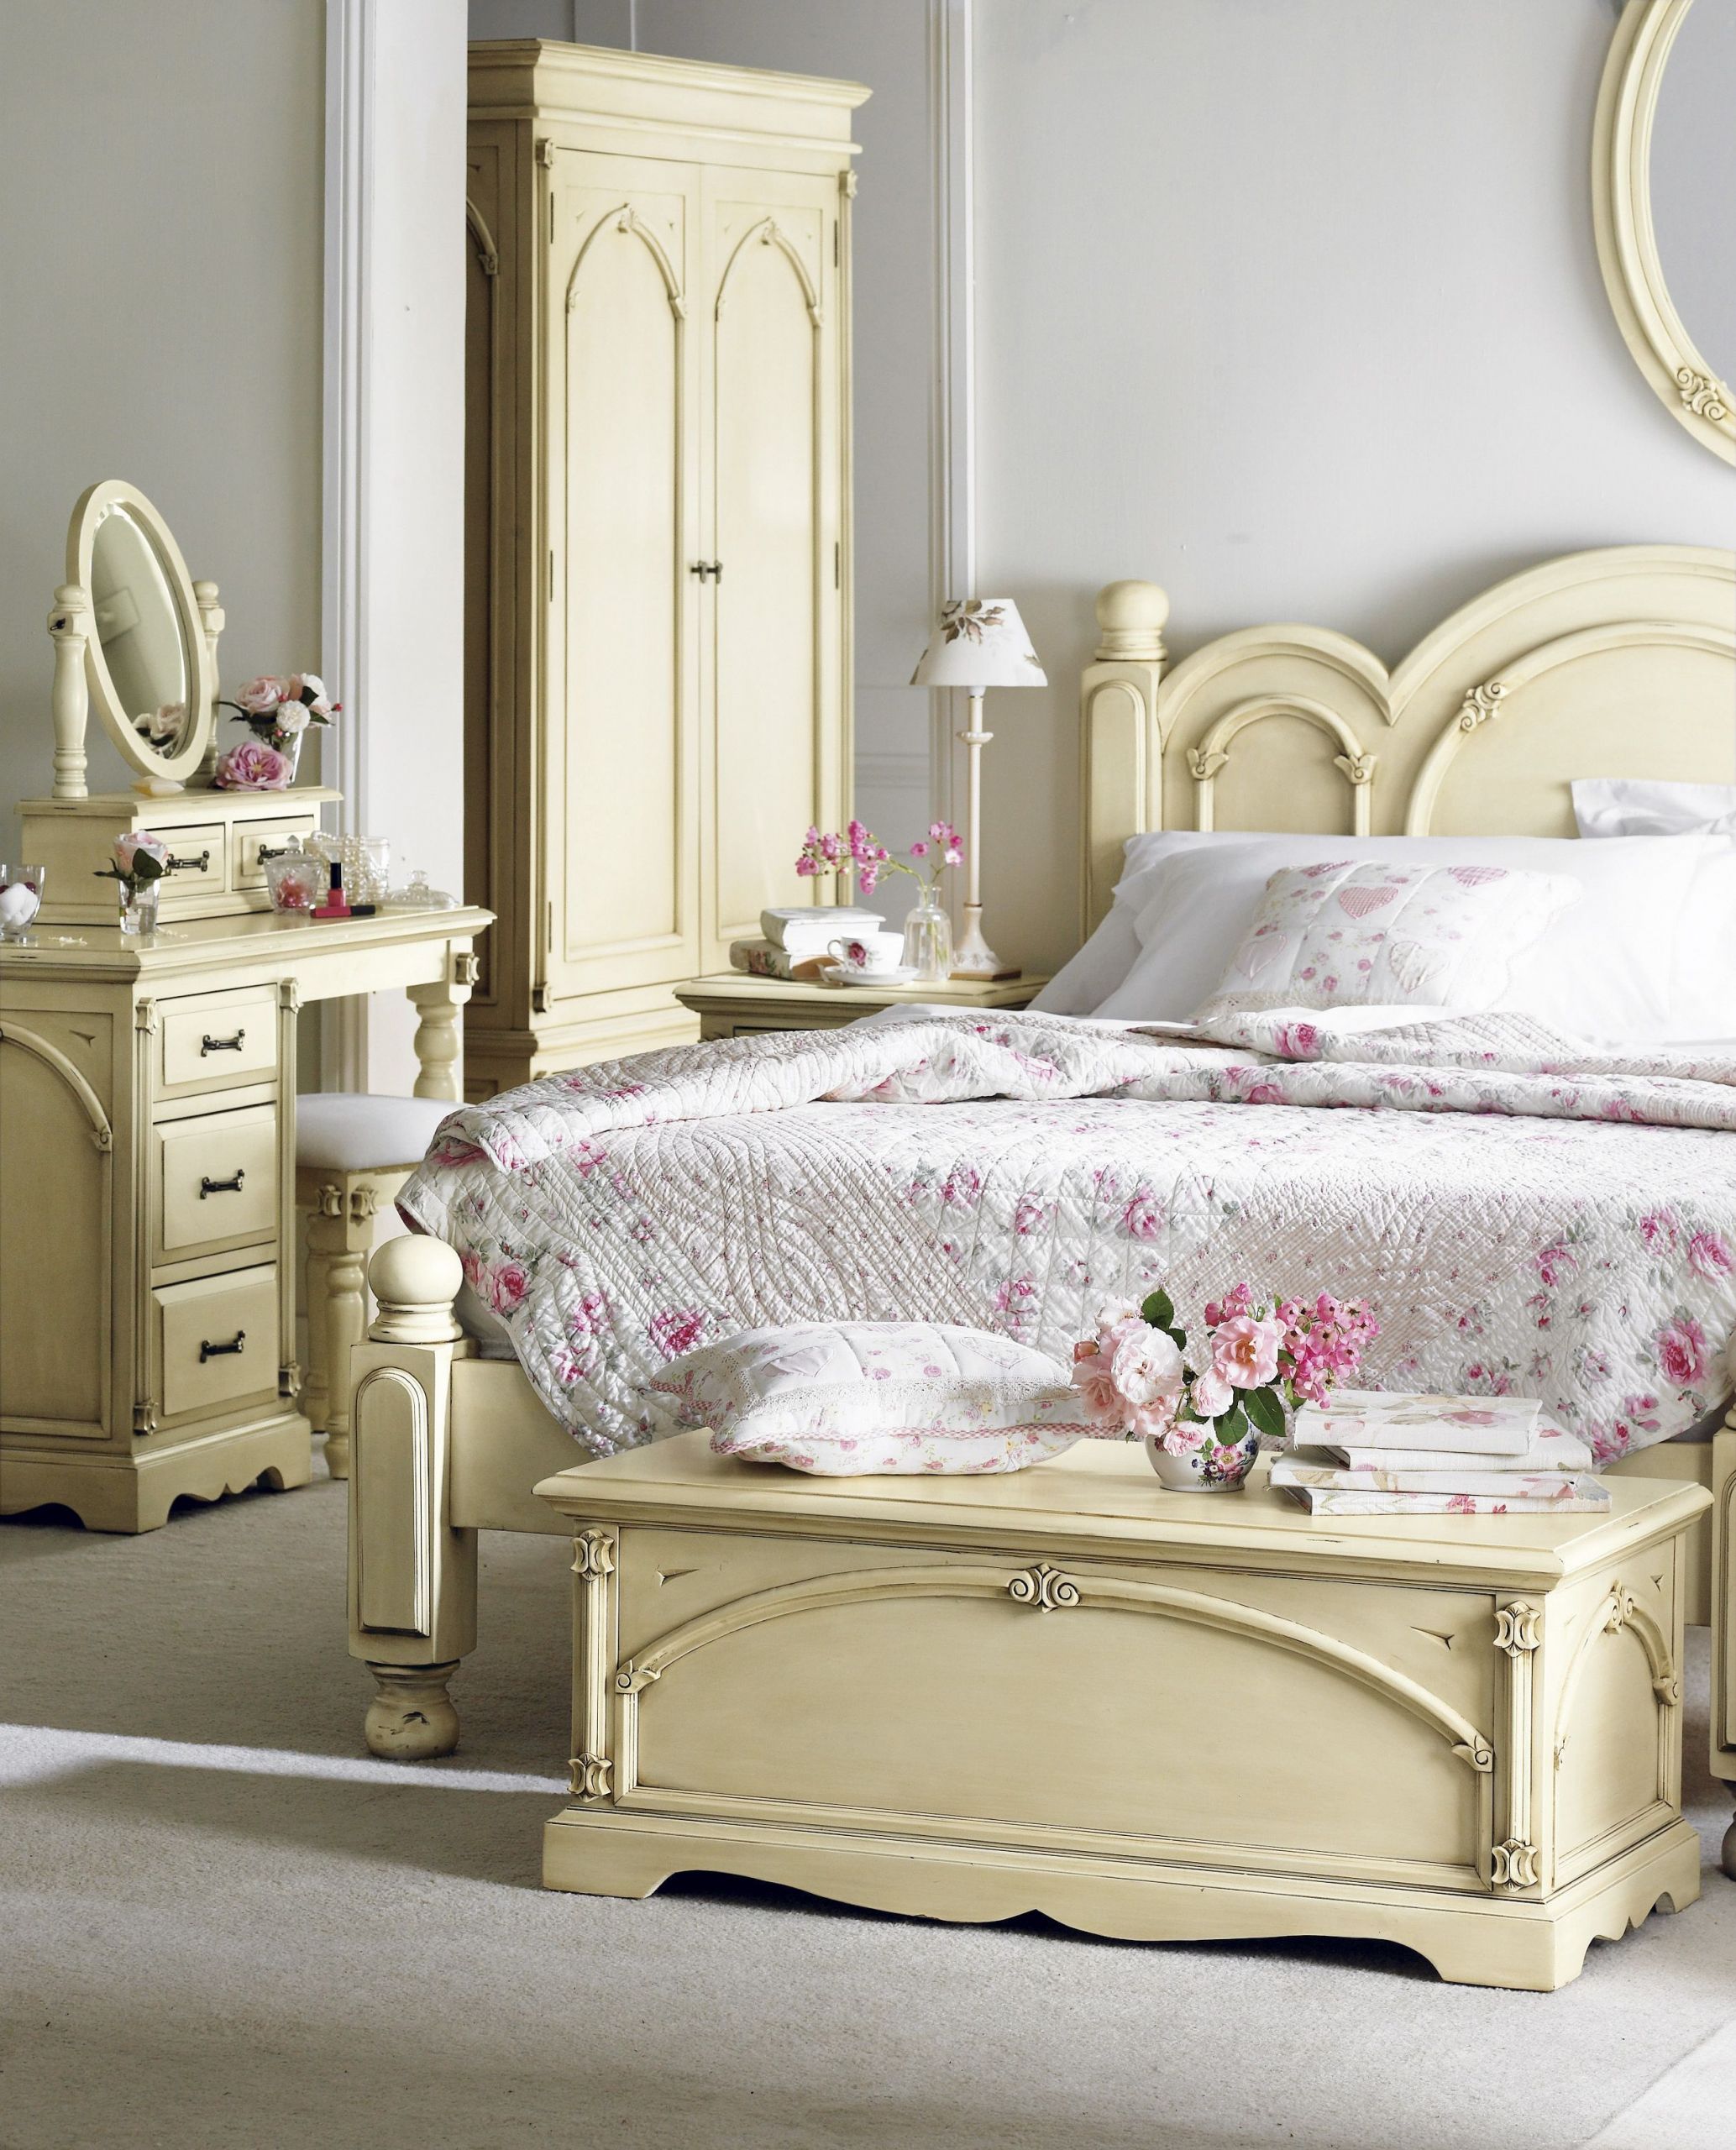 White Shabby Chic Bedroom Furniture
 20 Awesome Shabby Chic Bedroom Furniture Ideas